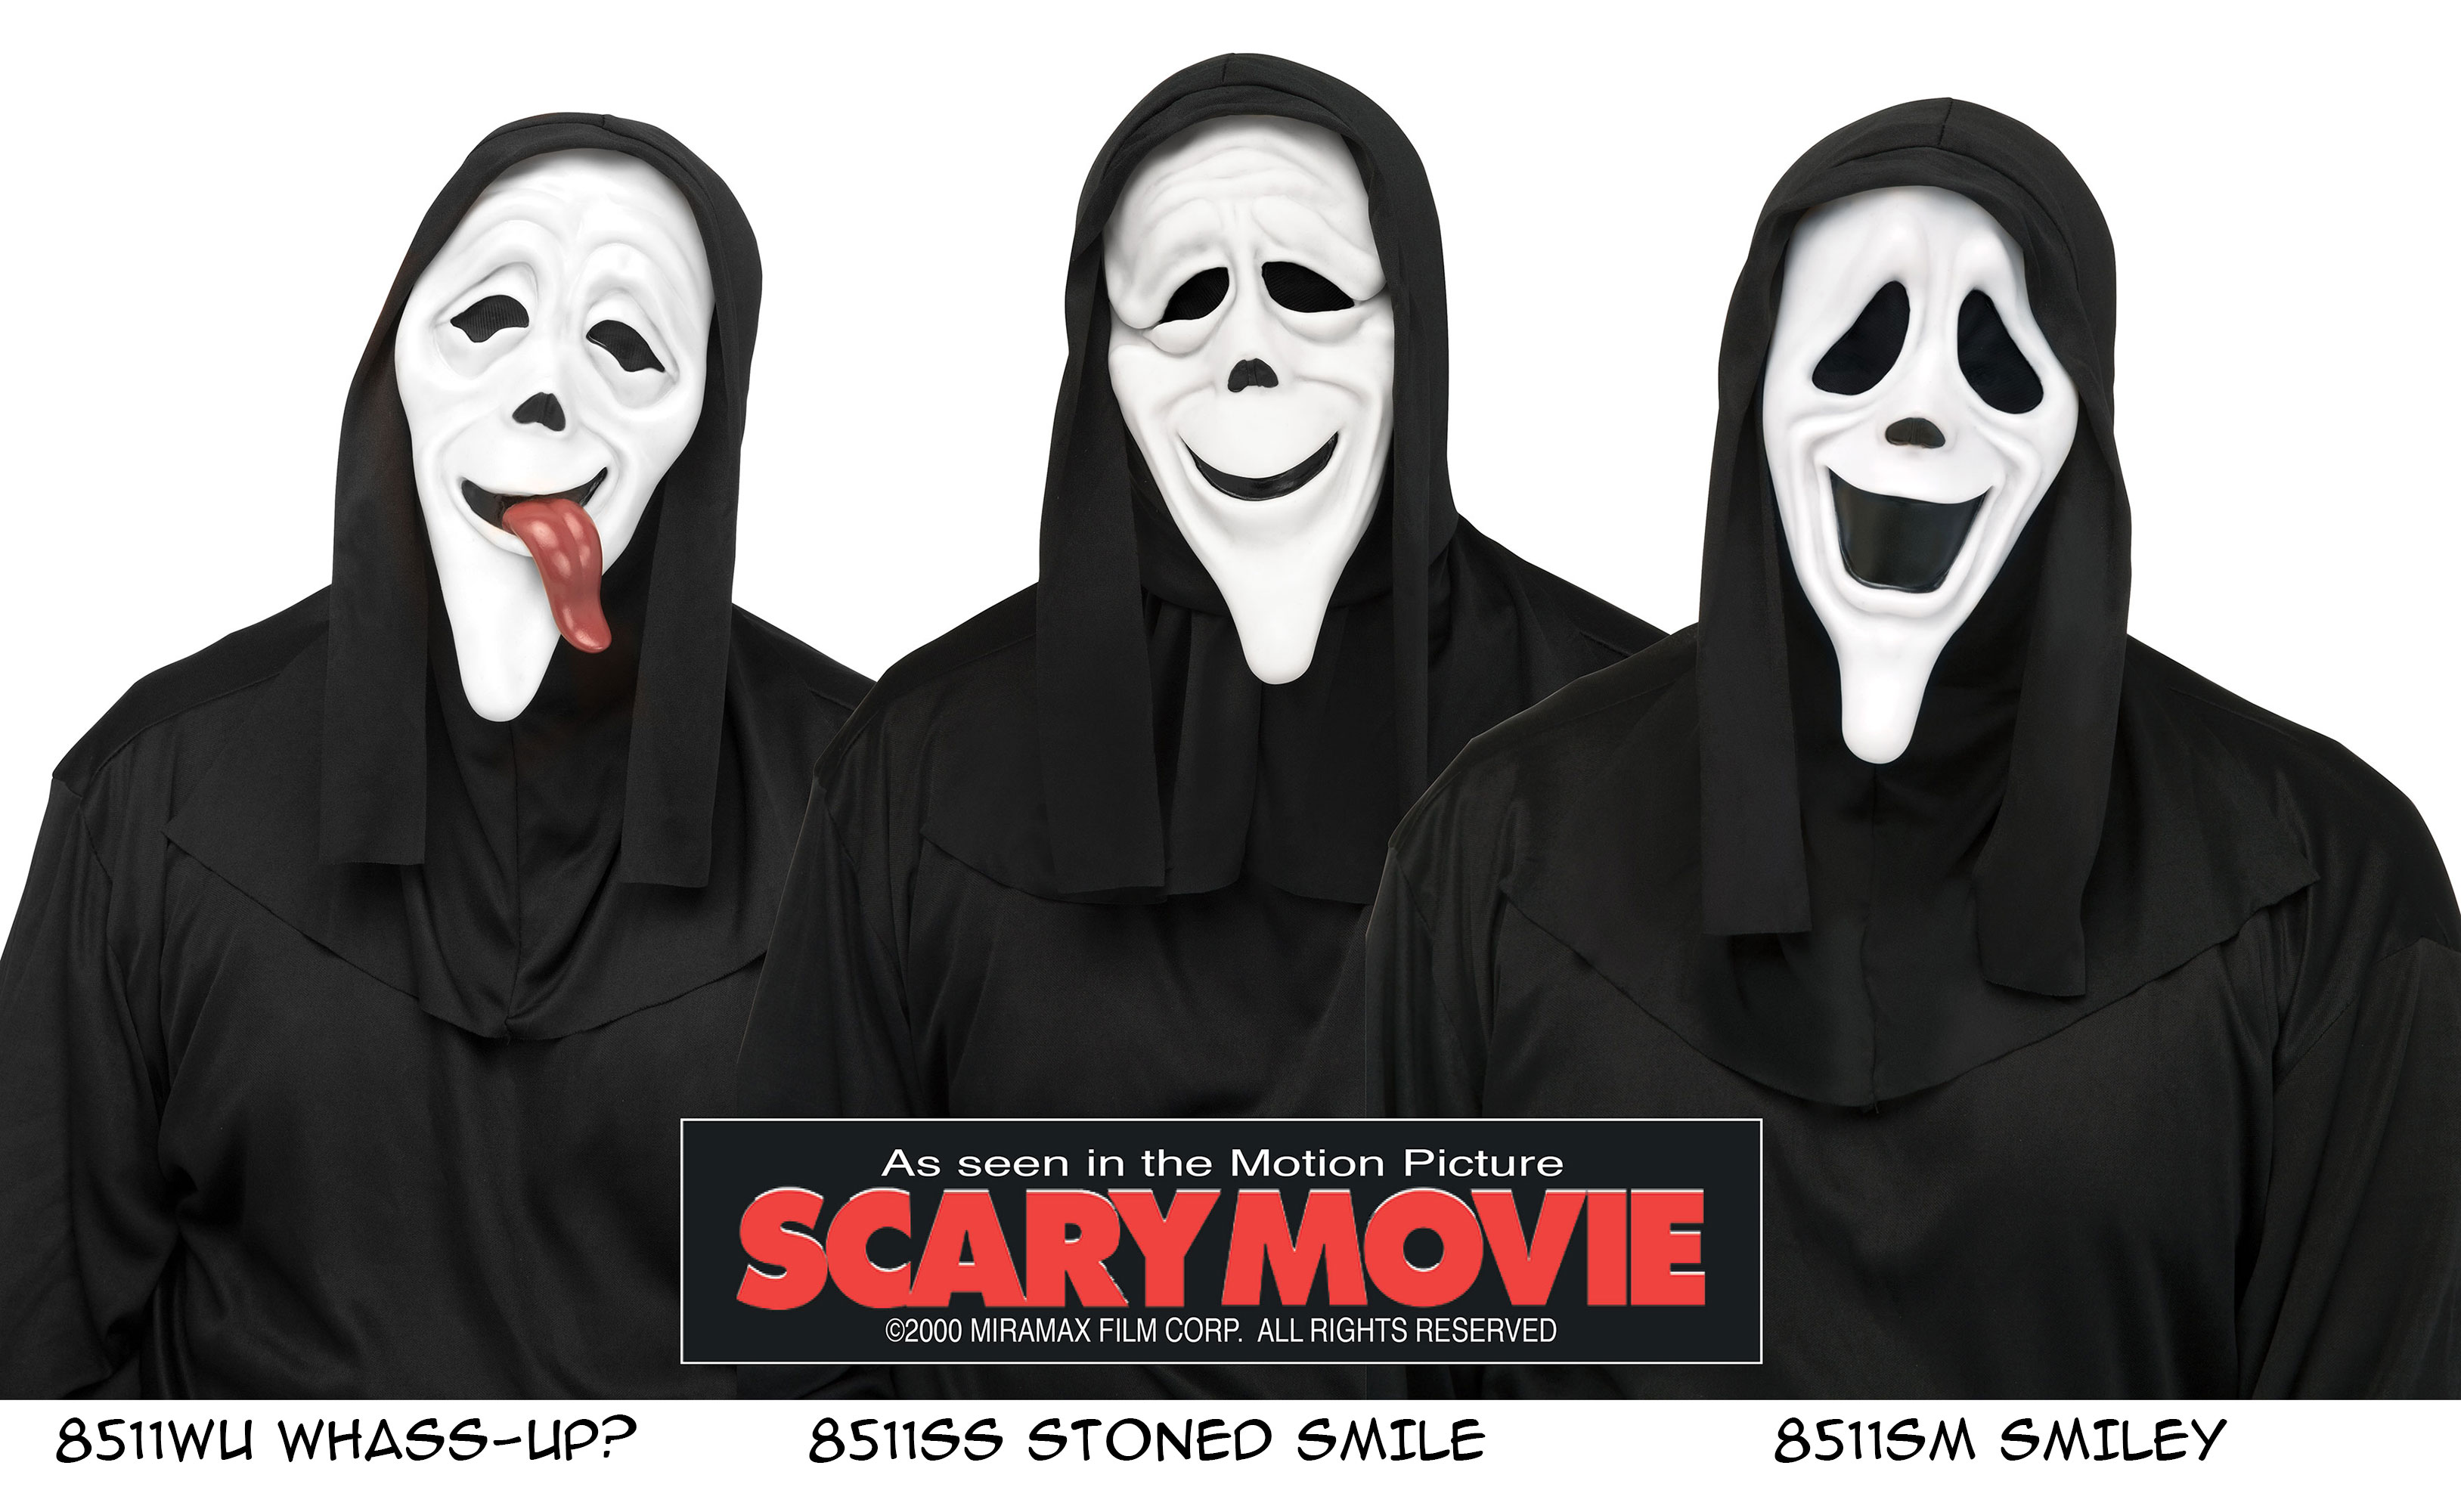 Stoned Ghost Face (Scream/Scary Movie spoof) by